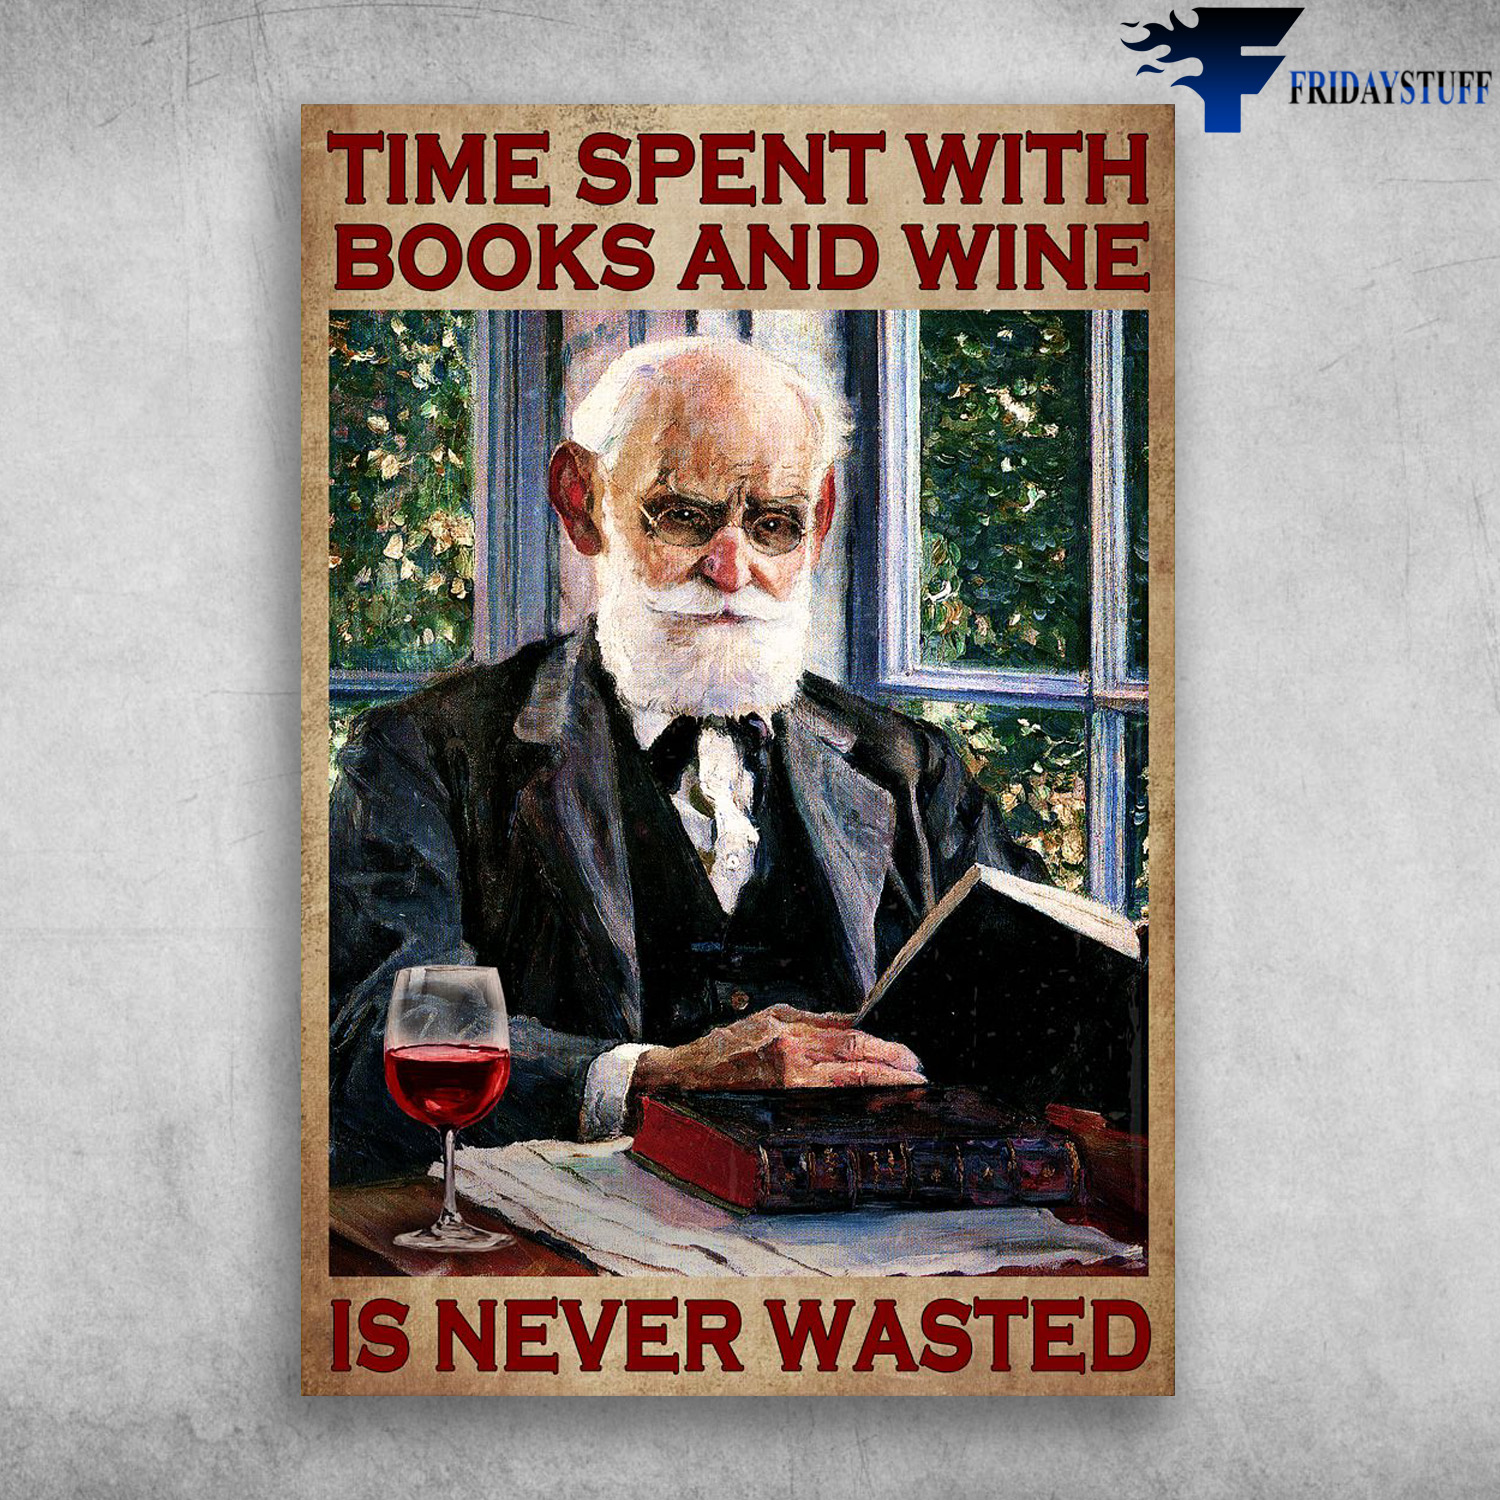 Old Man Reading Book With Wine - Time Spent With Books And Wine, Is Never Wasted